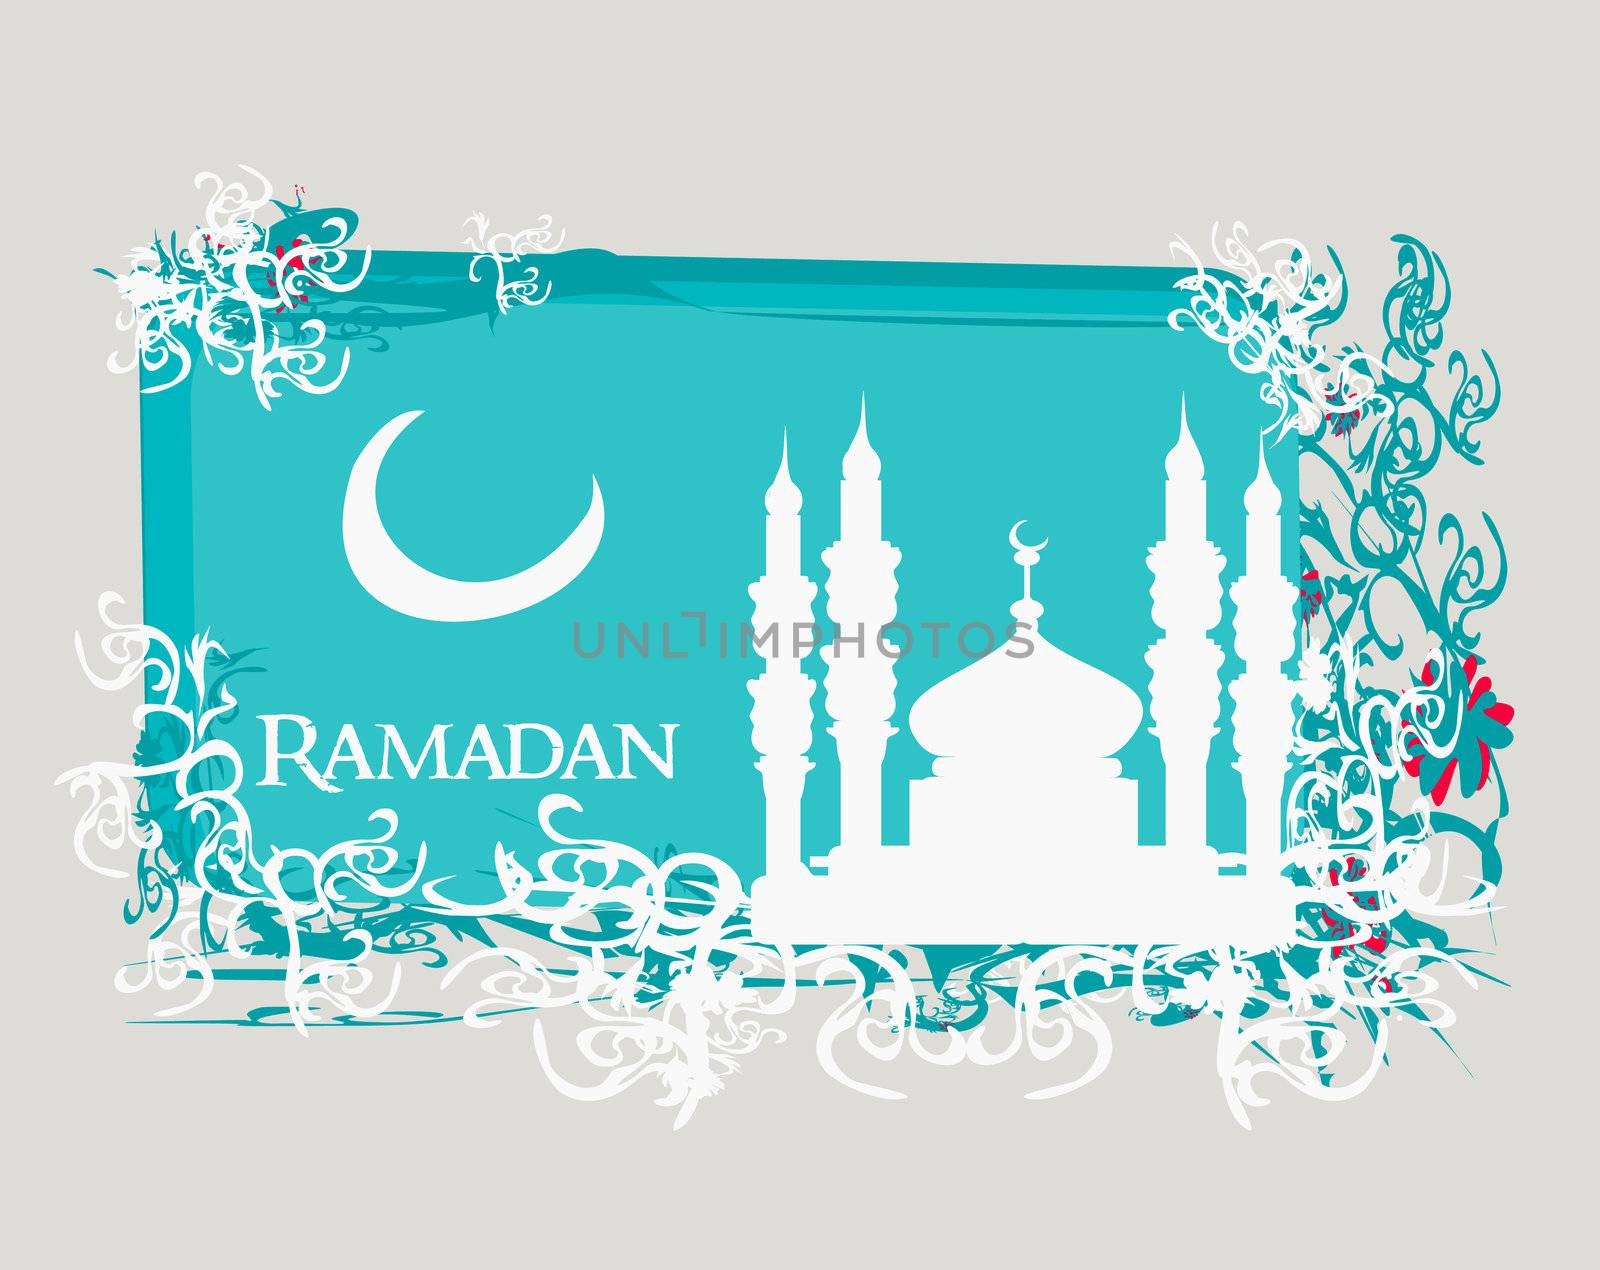 Ramadan background - mosque silhouette vector card by JackyBrown